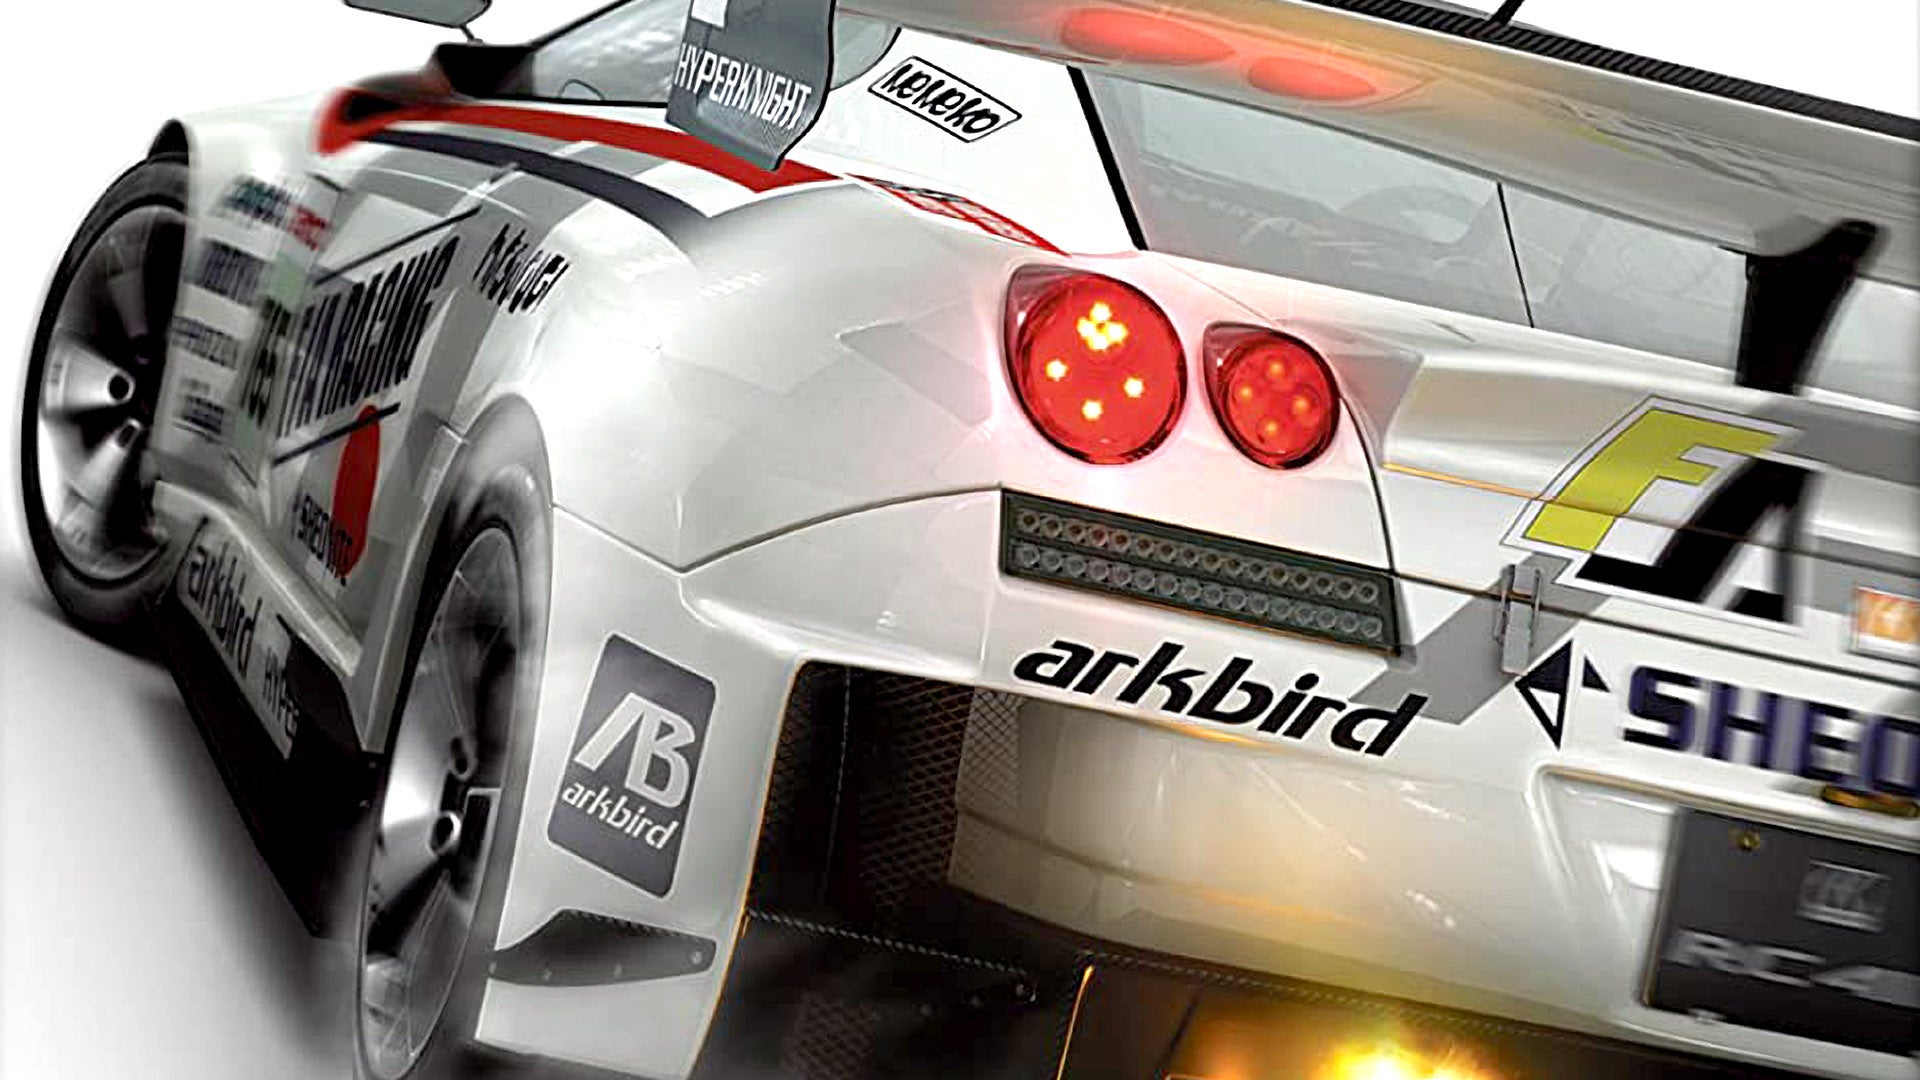 Image for DF Retro: Ridge Racer - The Second Decade - RR6/RR7, Ridge Racers PSP and Beyond!